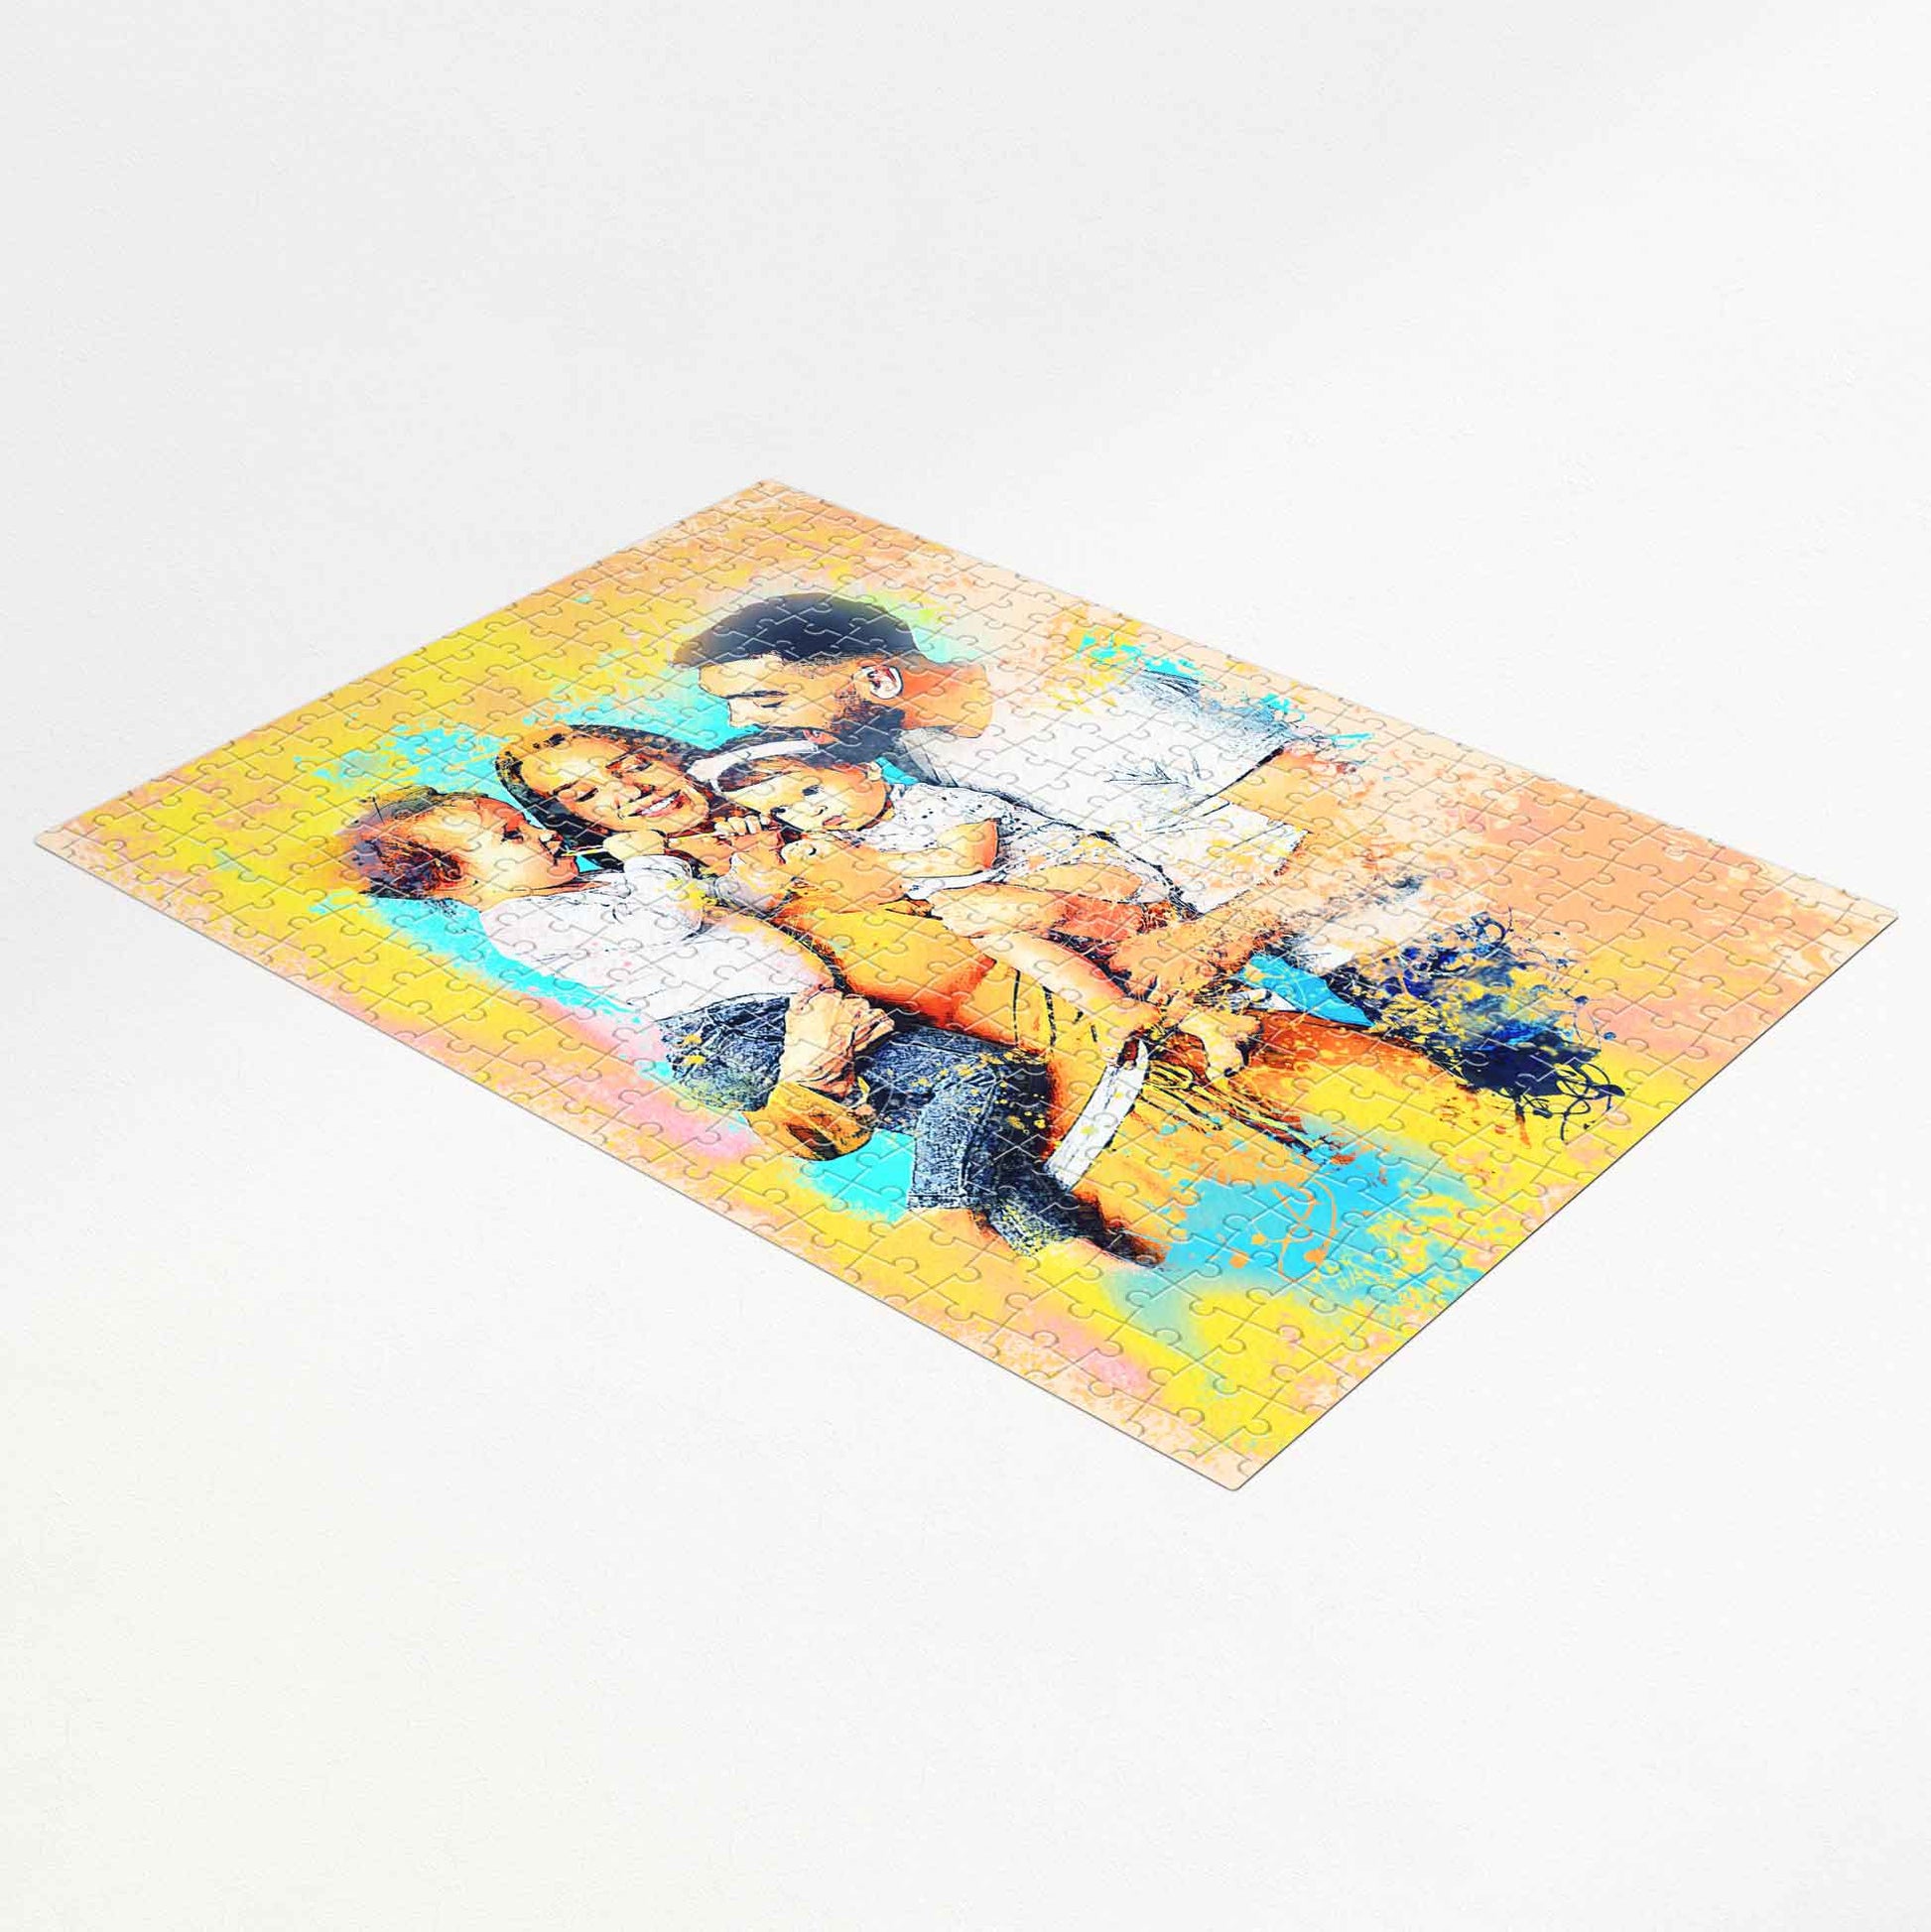 Celebrate love and happiness with our Personalised Watercolor Splash Jigsaw Puzzle. This colorful and vibrant masterpiece is an ultra-cool and unique addition to your gift list. Handmade for the ones you cherish